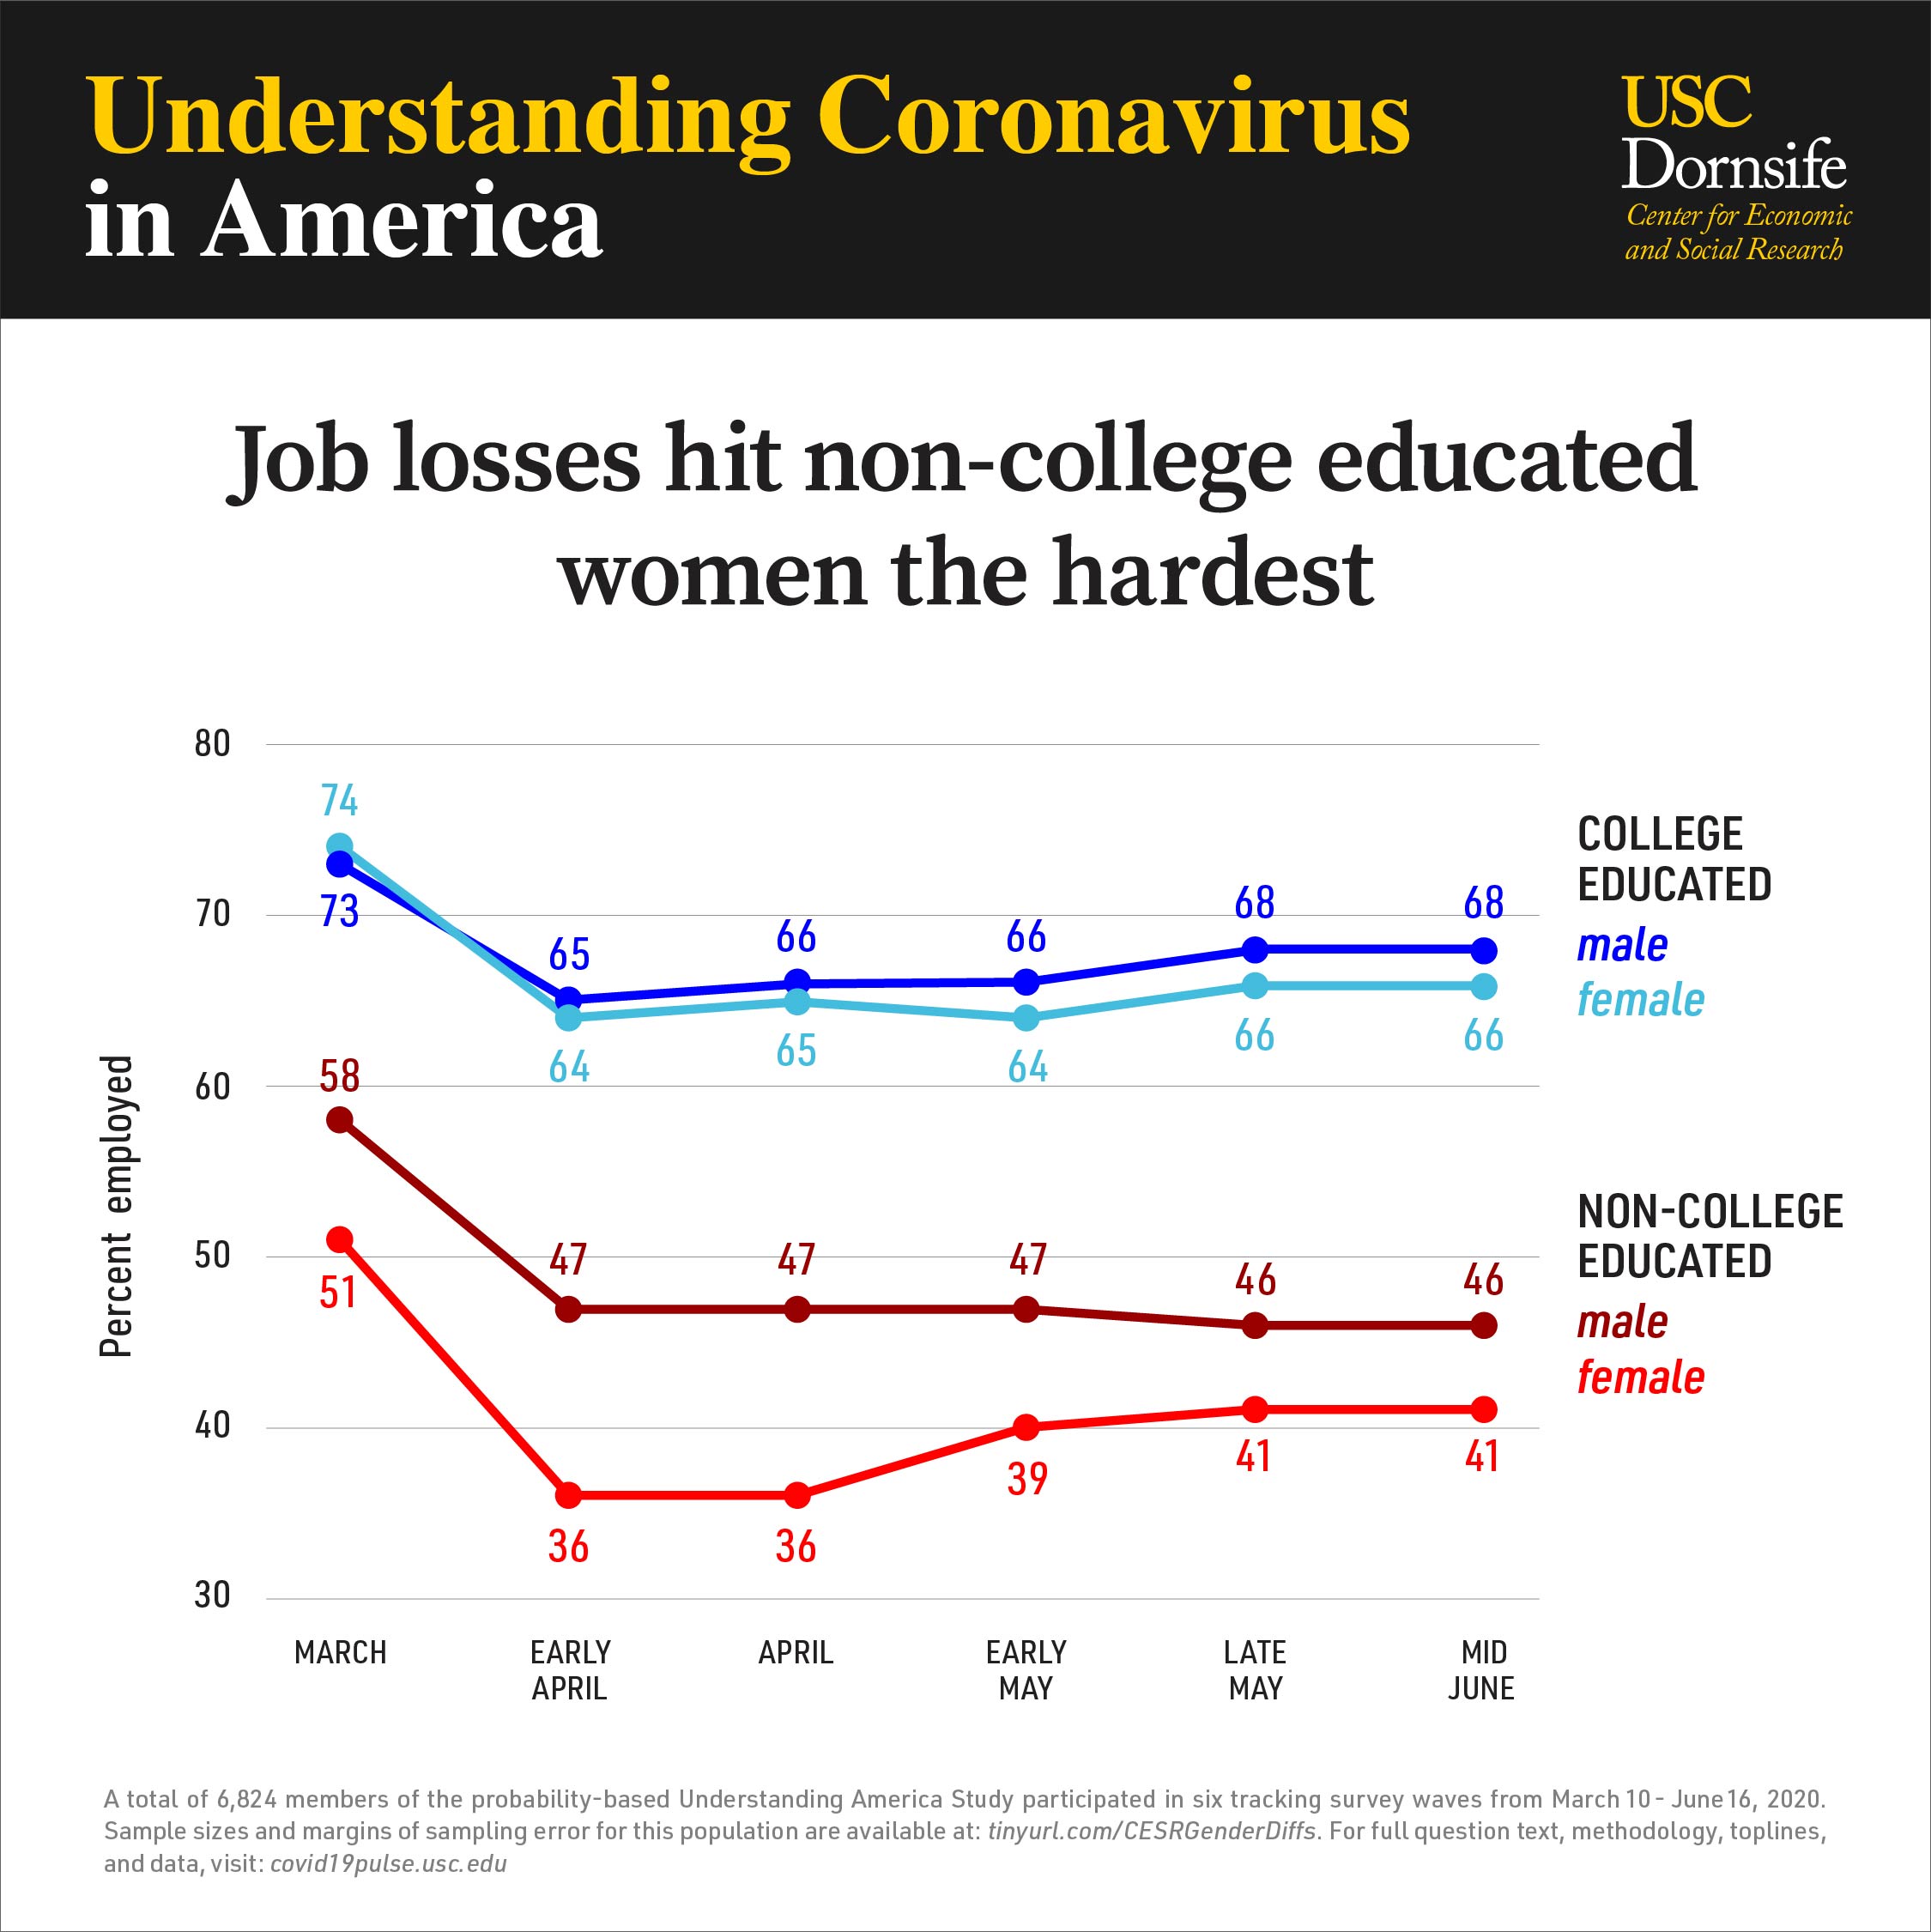 Chart compares job losses among college-educated on non-college educated women and men from March to mid-June.